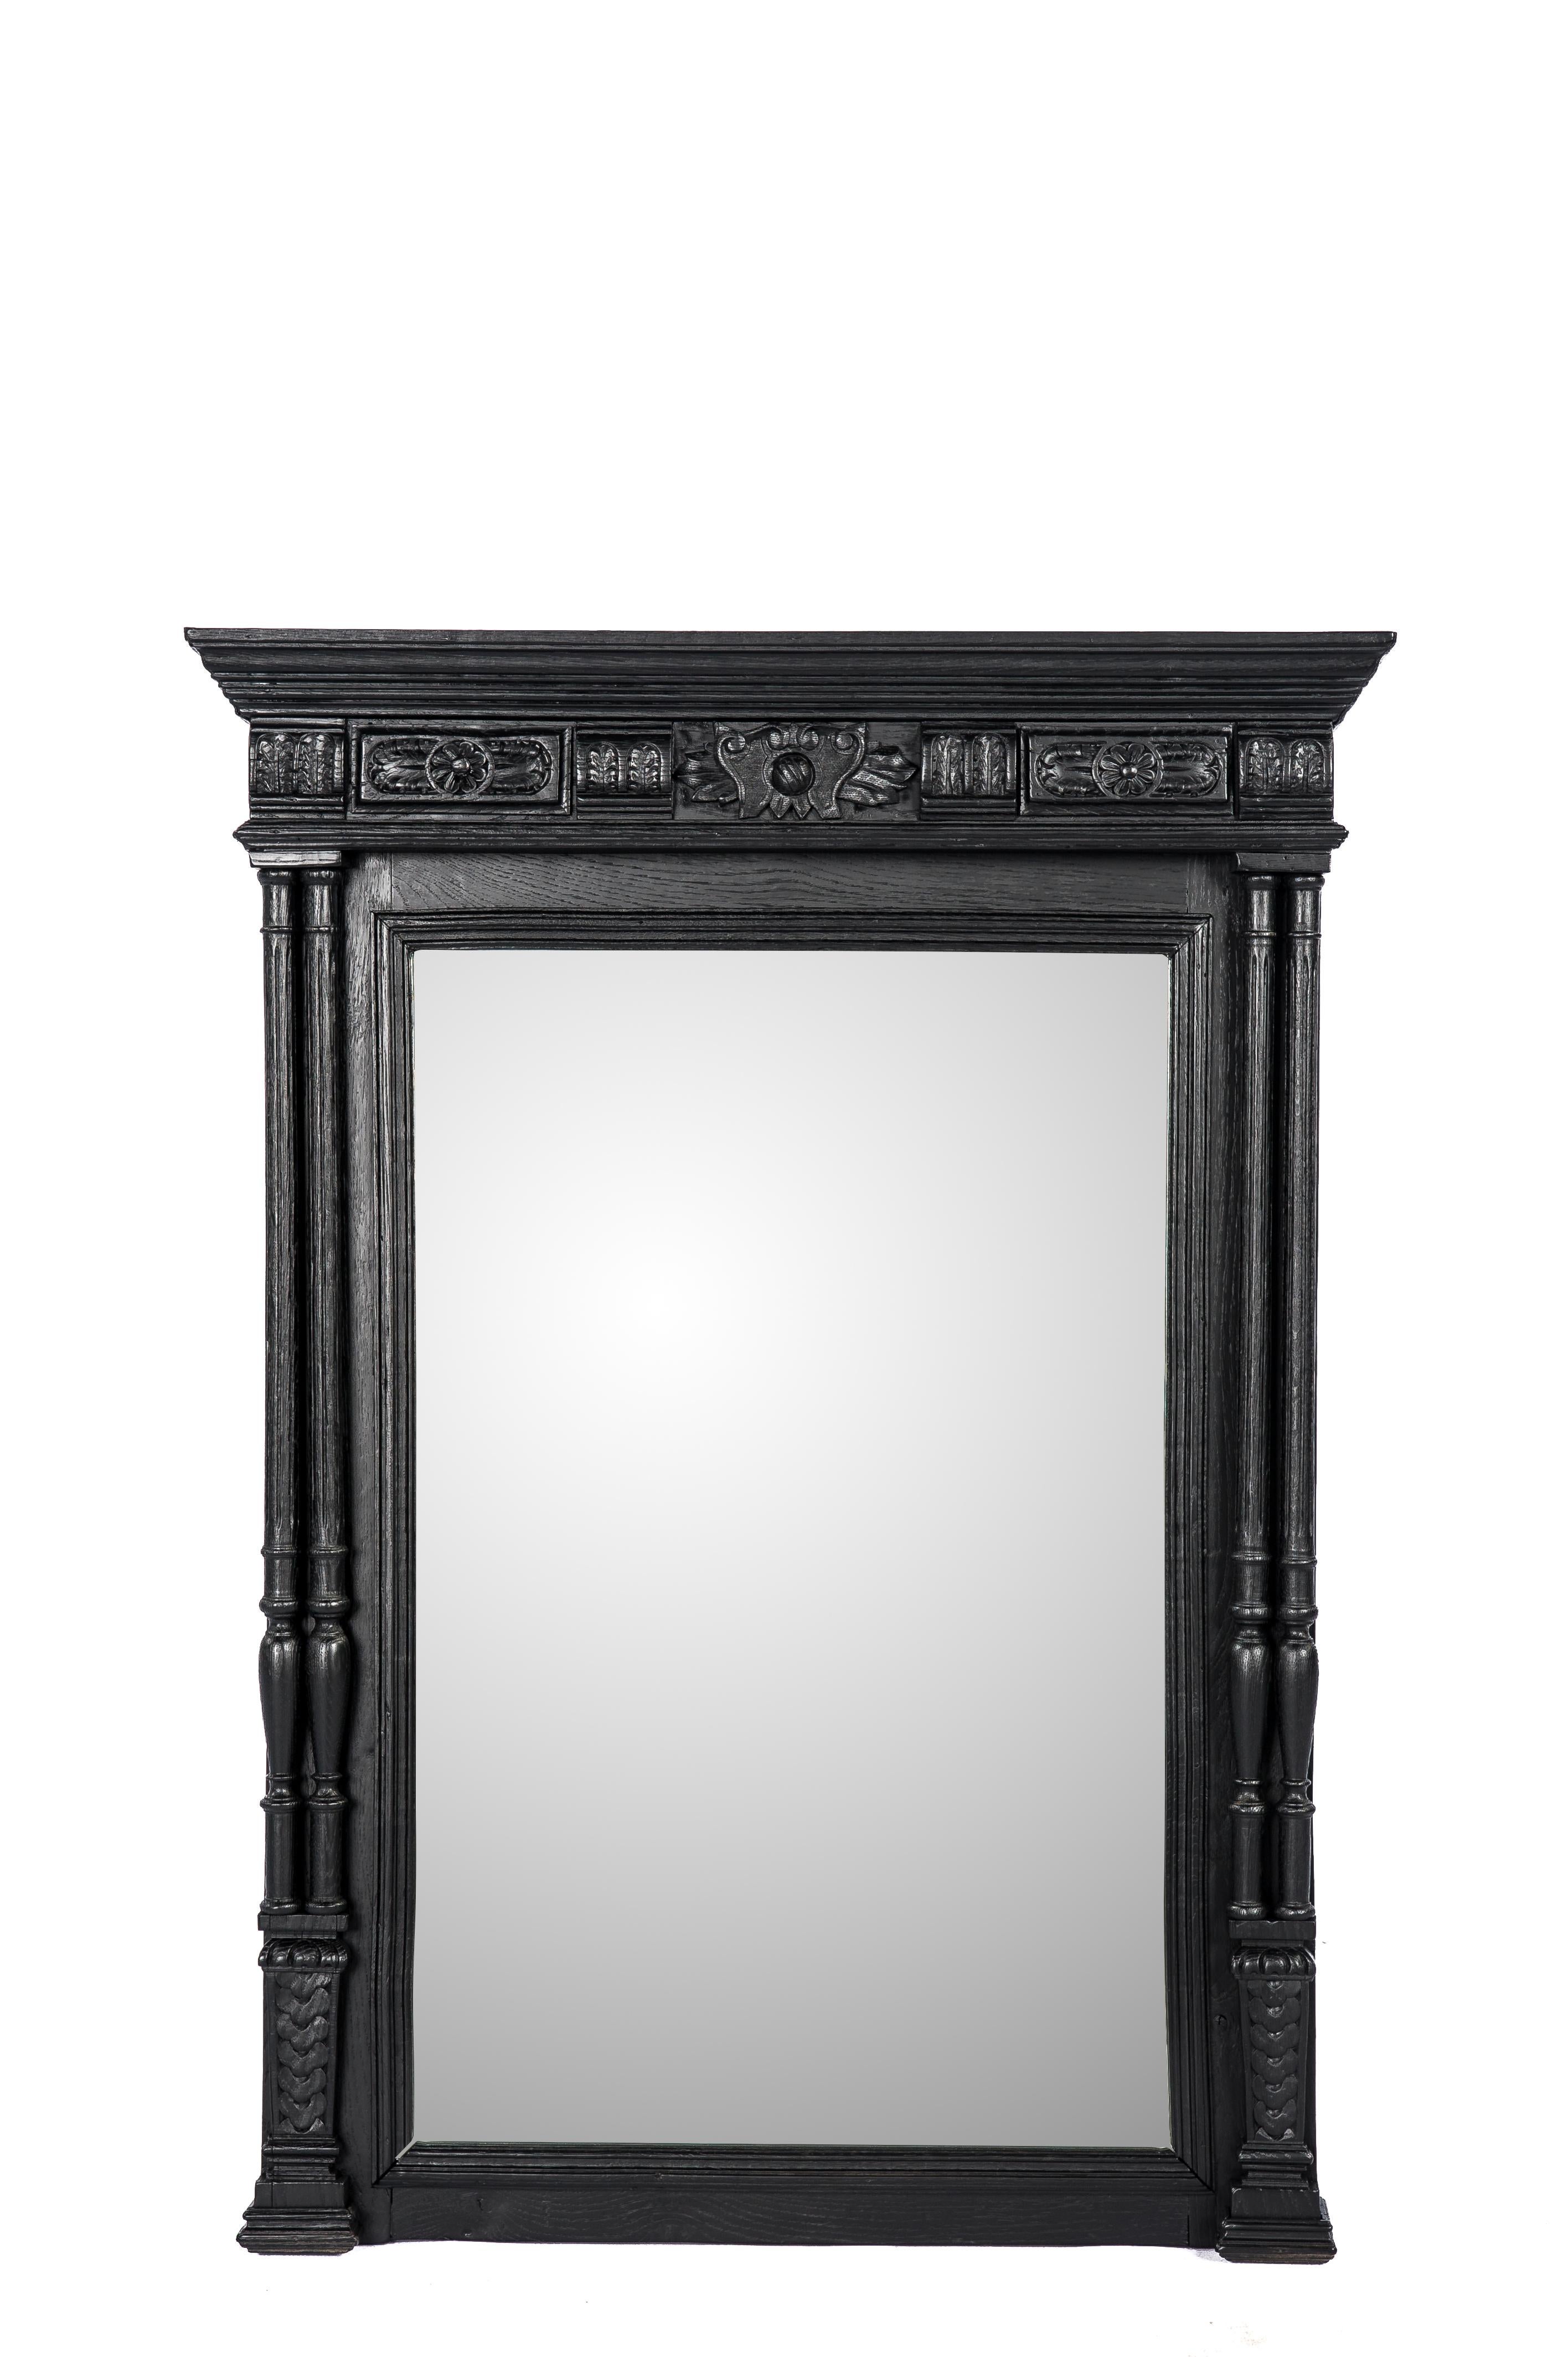 This bold mirror was made in France in the late 19th century. It is elaborately decorated with classical Henri II elements such as acanthus, pinnacles, and double columns. The mirror frame was completely made in the finest quality oak with highly